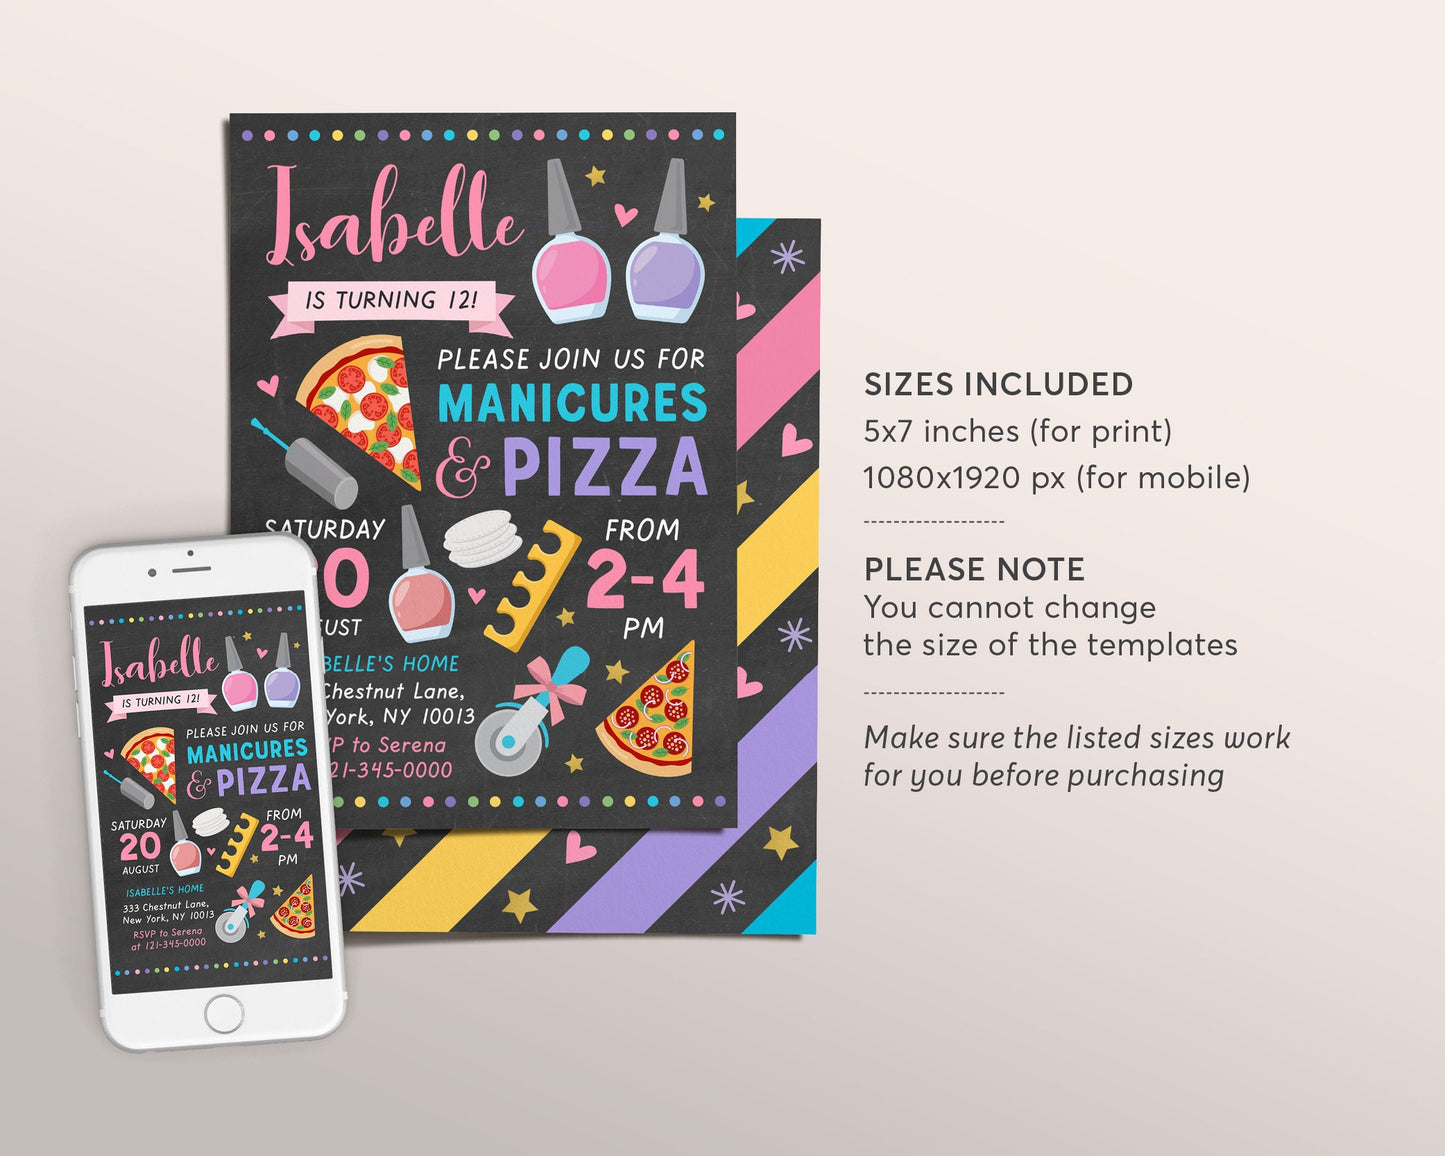 Manicures And Pizza Birthday Party Invitation Editable Template, Pedicures Mani Pedi Spa Day Chalkboard Invite, Girl Teen Tween Printable